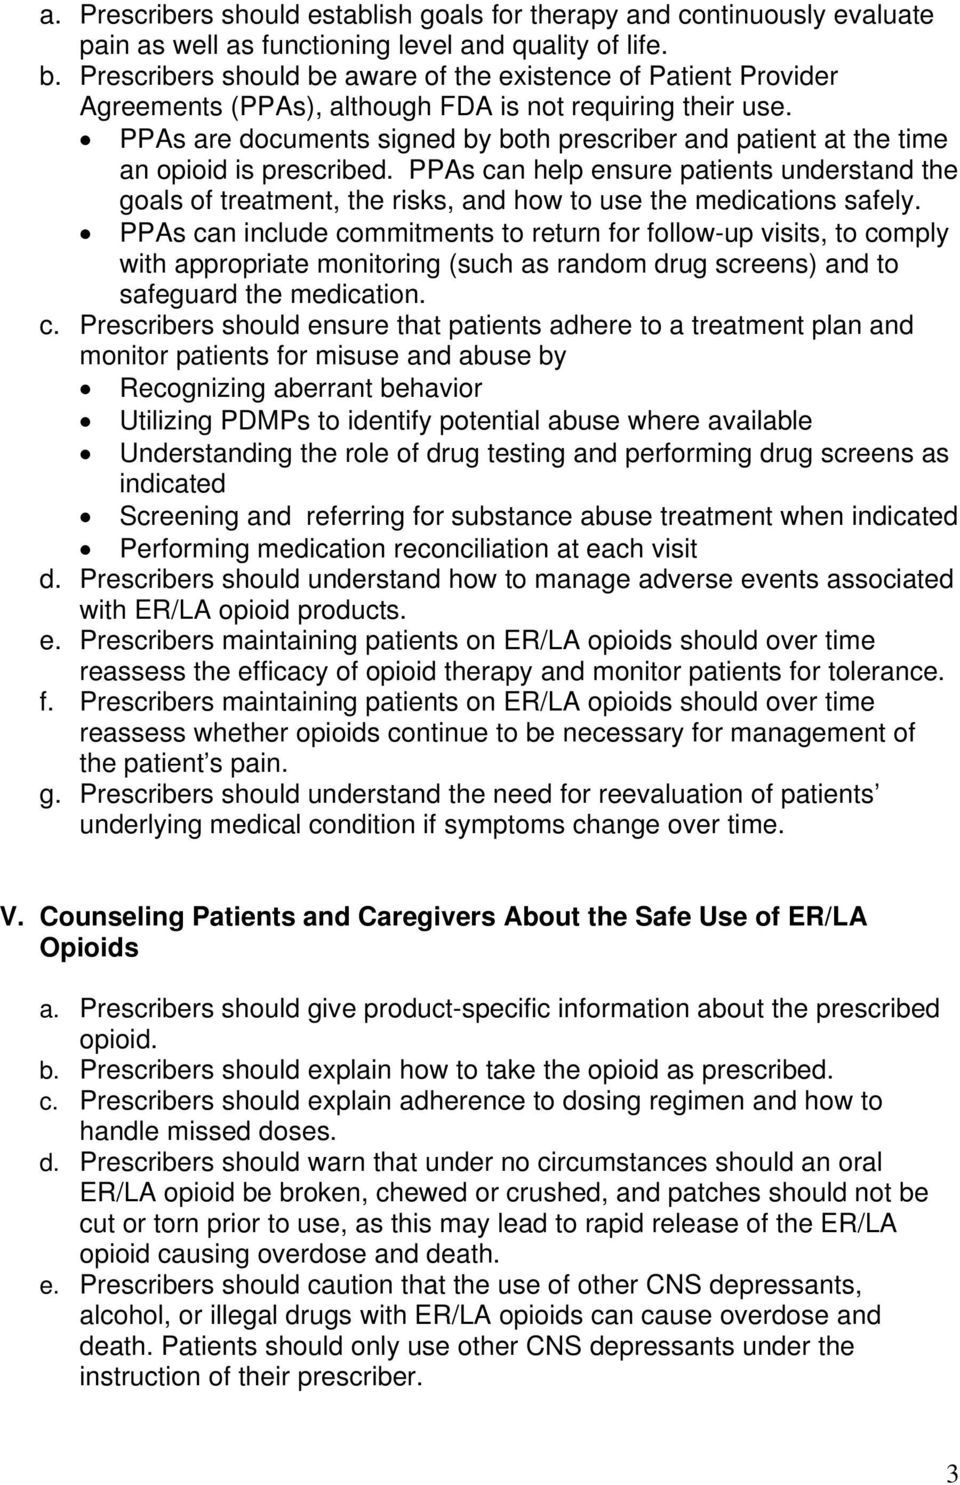 PPAs are documents signed by both prescriber and patient at the time an opioid is prescribed.